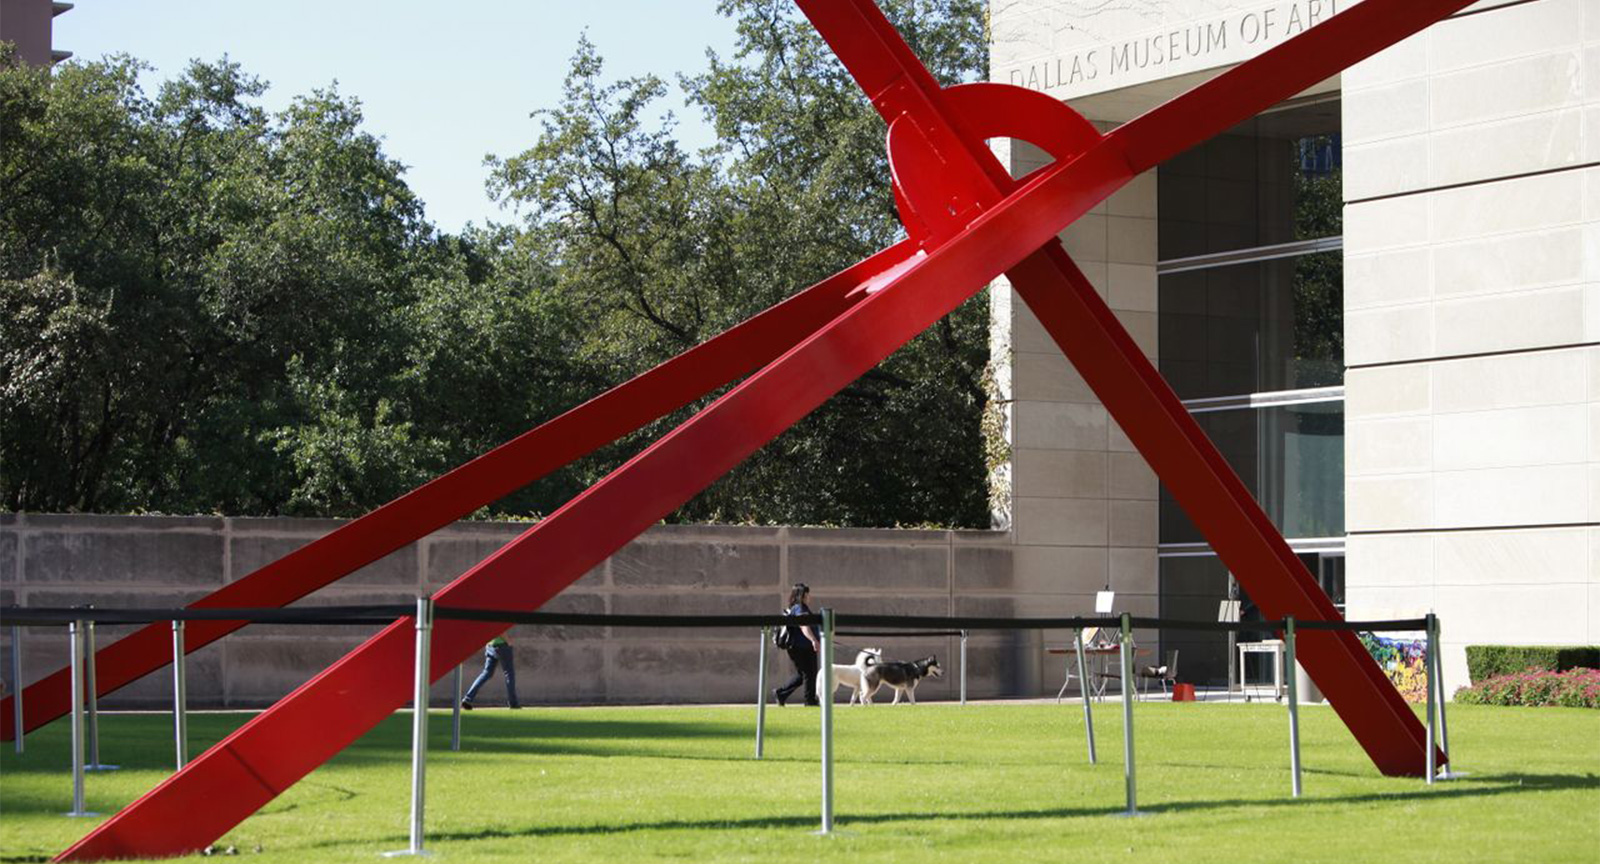 Dallas Museum of Art Announces The 25th Anniversary Season for Arts & Letters Live, The Museum’s Literary and Performing Arts Series